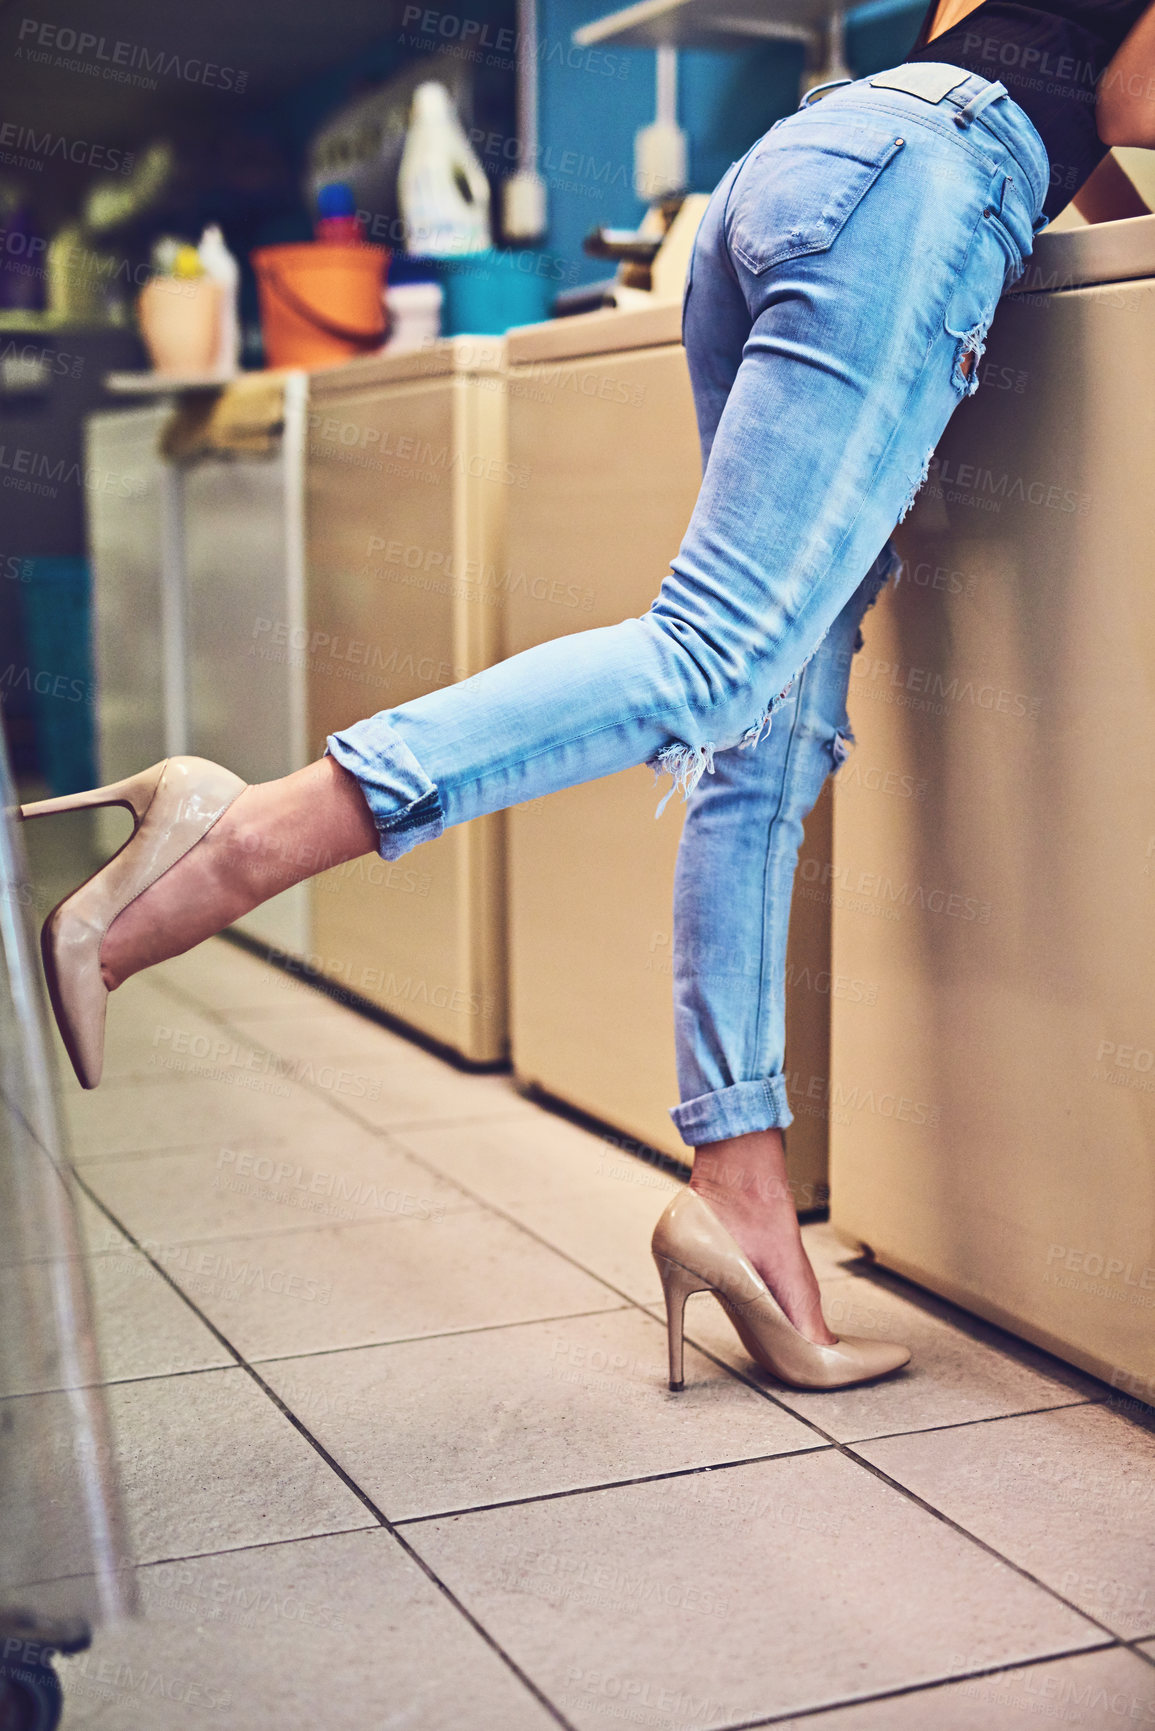 Buy stock photo Shot of an unrecognizable woman's bottom half showing her wearing high heels while doing her washing in a laundry room